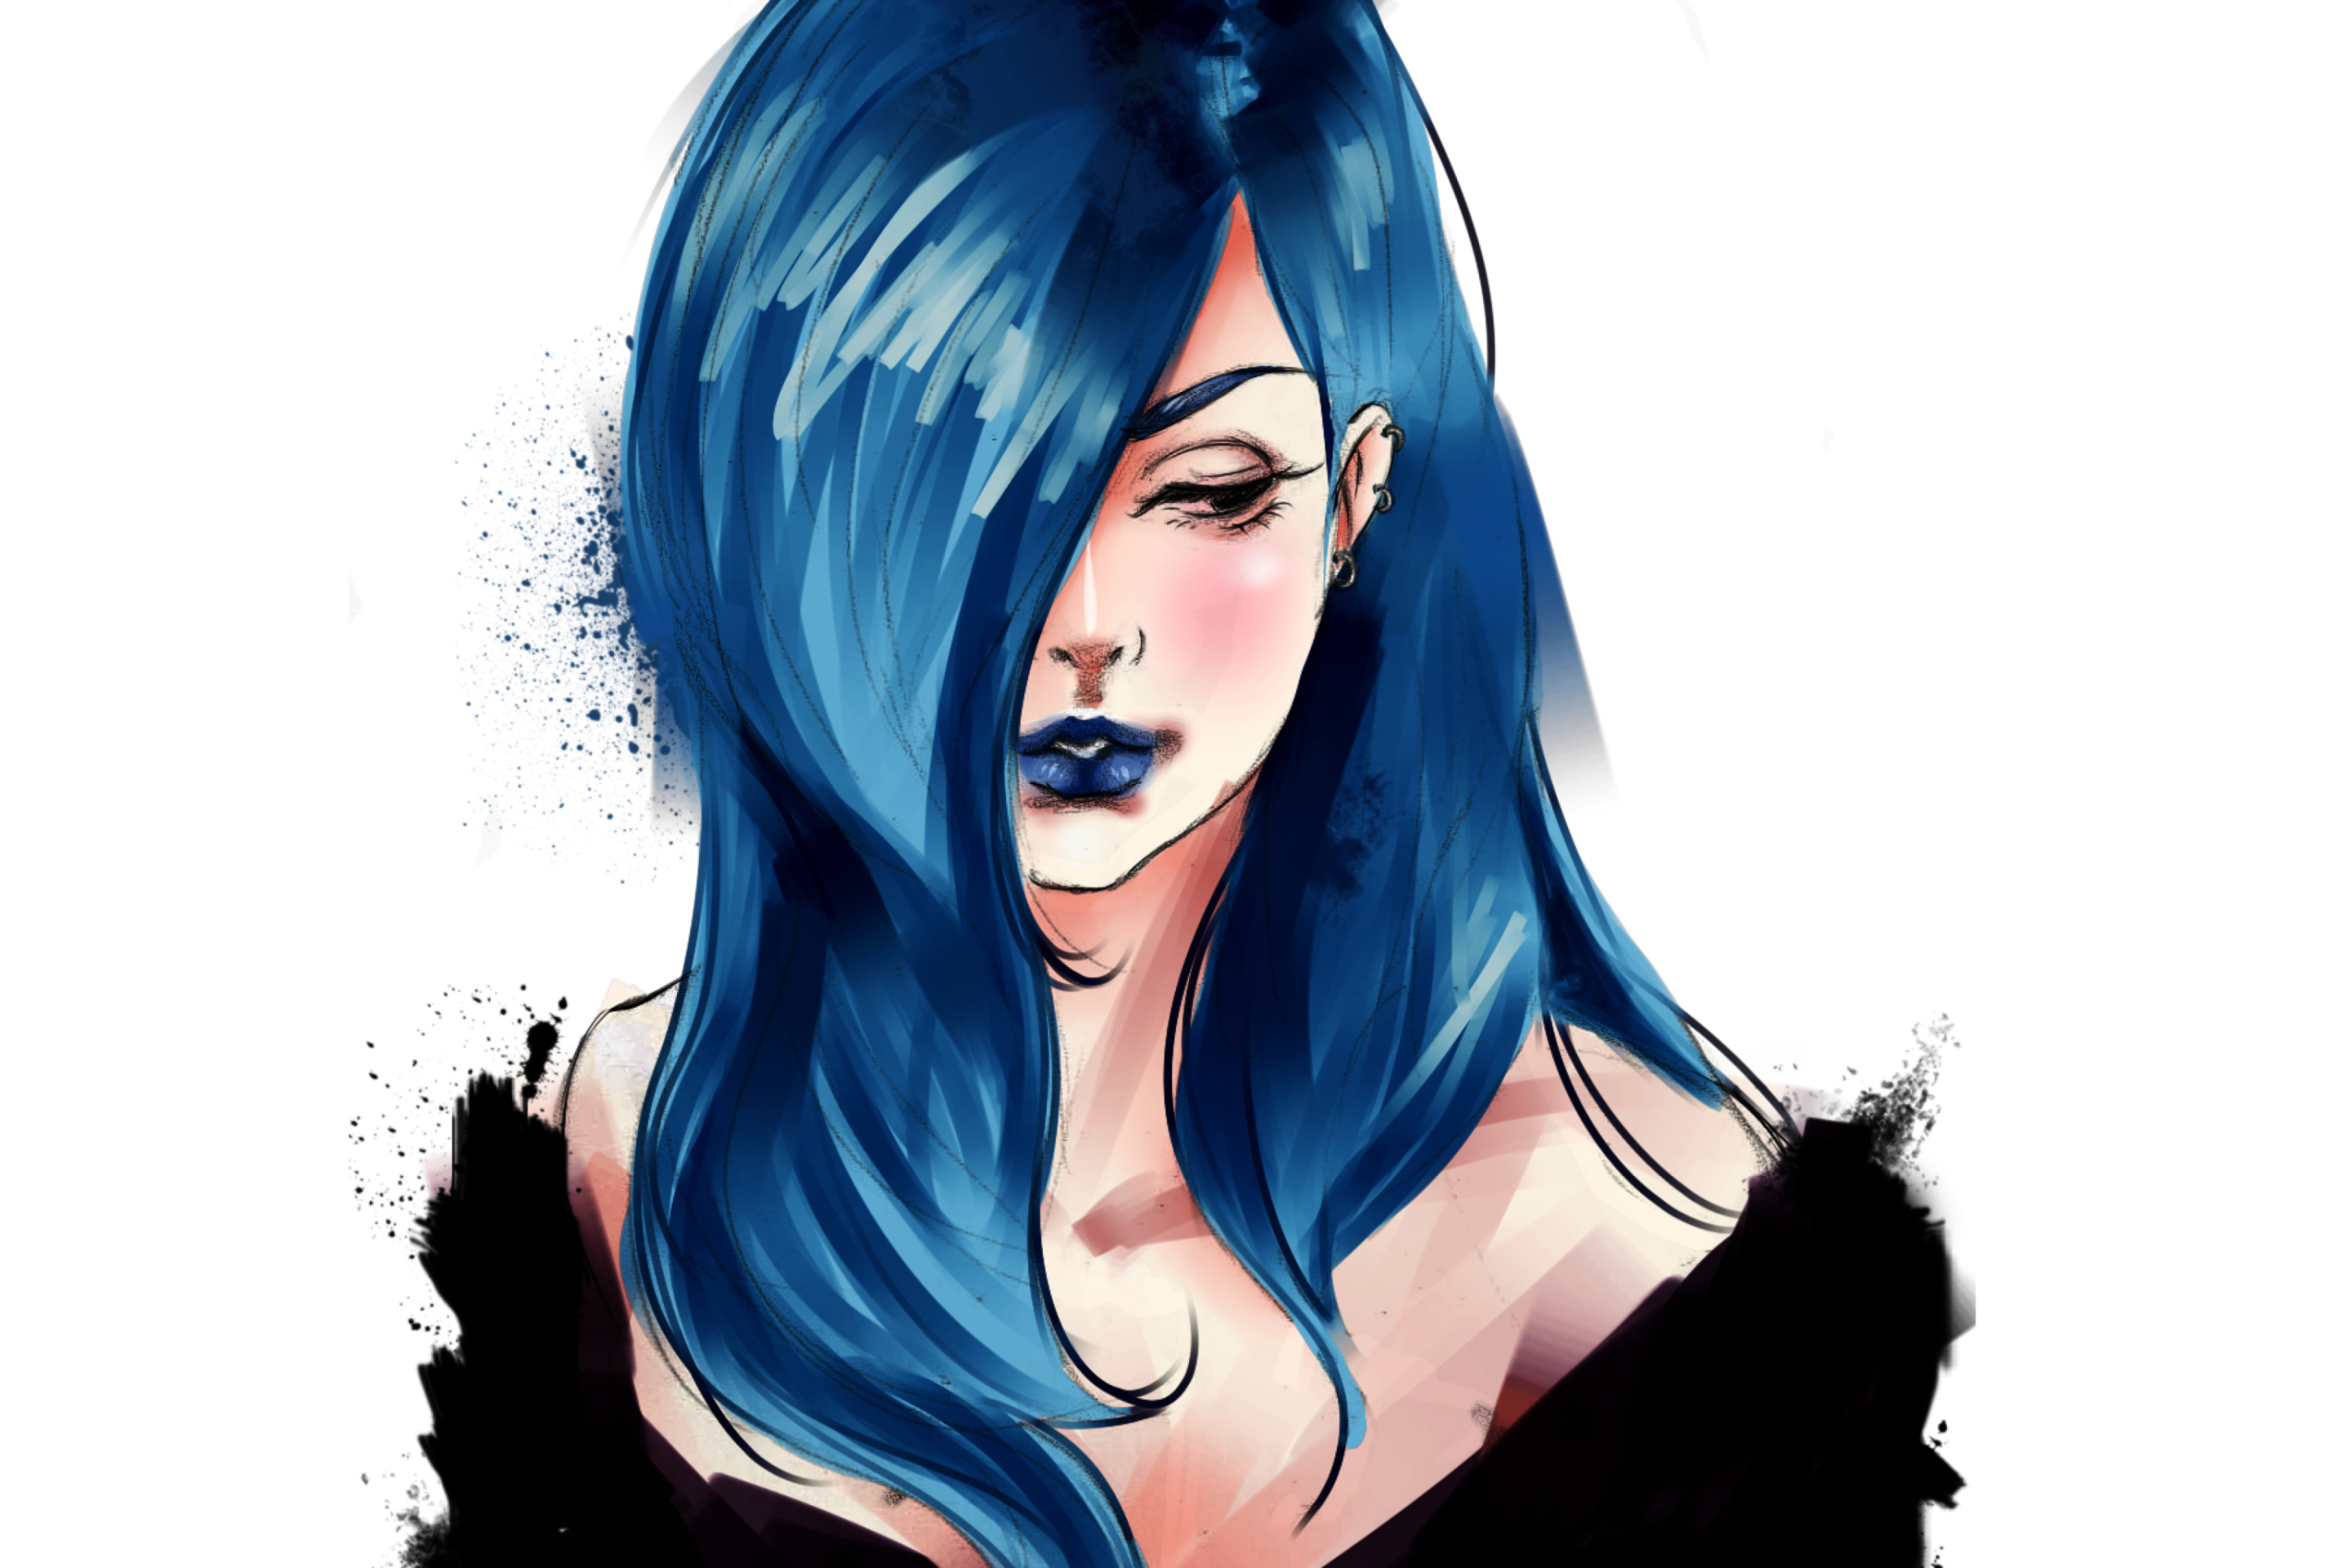 Girl With Blue Hair Painting screenshot #1 2880x1920